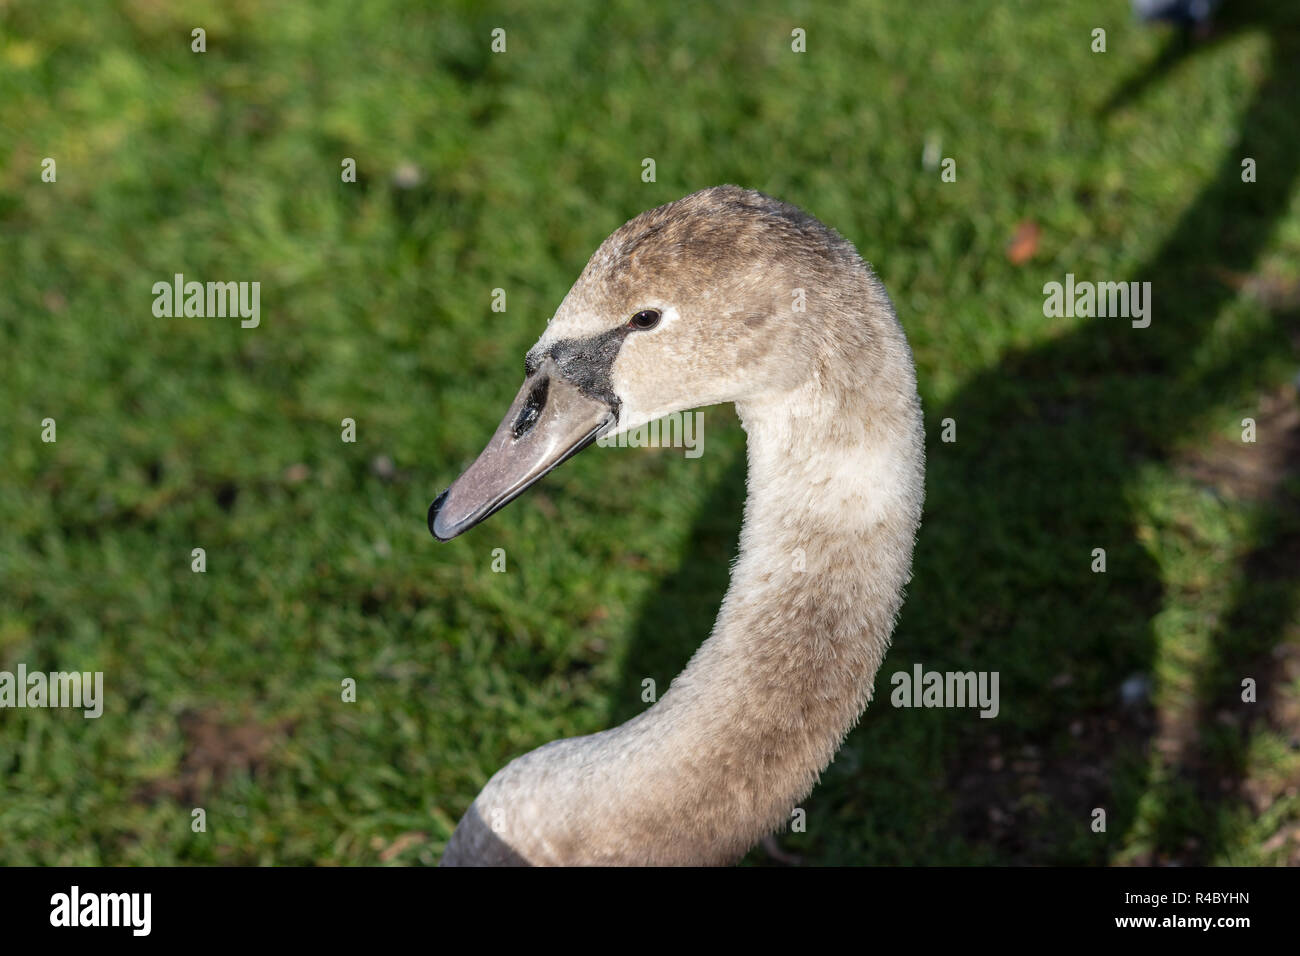 The head and neck of a mute swan (Cygnus olor) cygnet approximately 6 months old facing to the left against a mainly green background Stock Photo